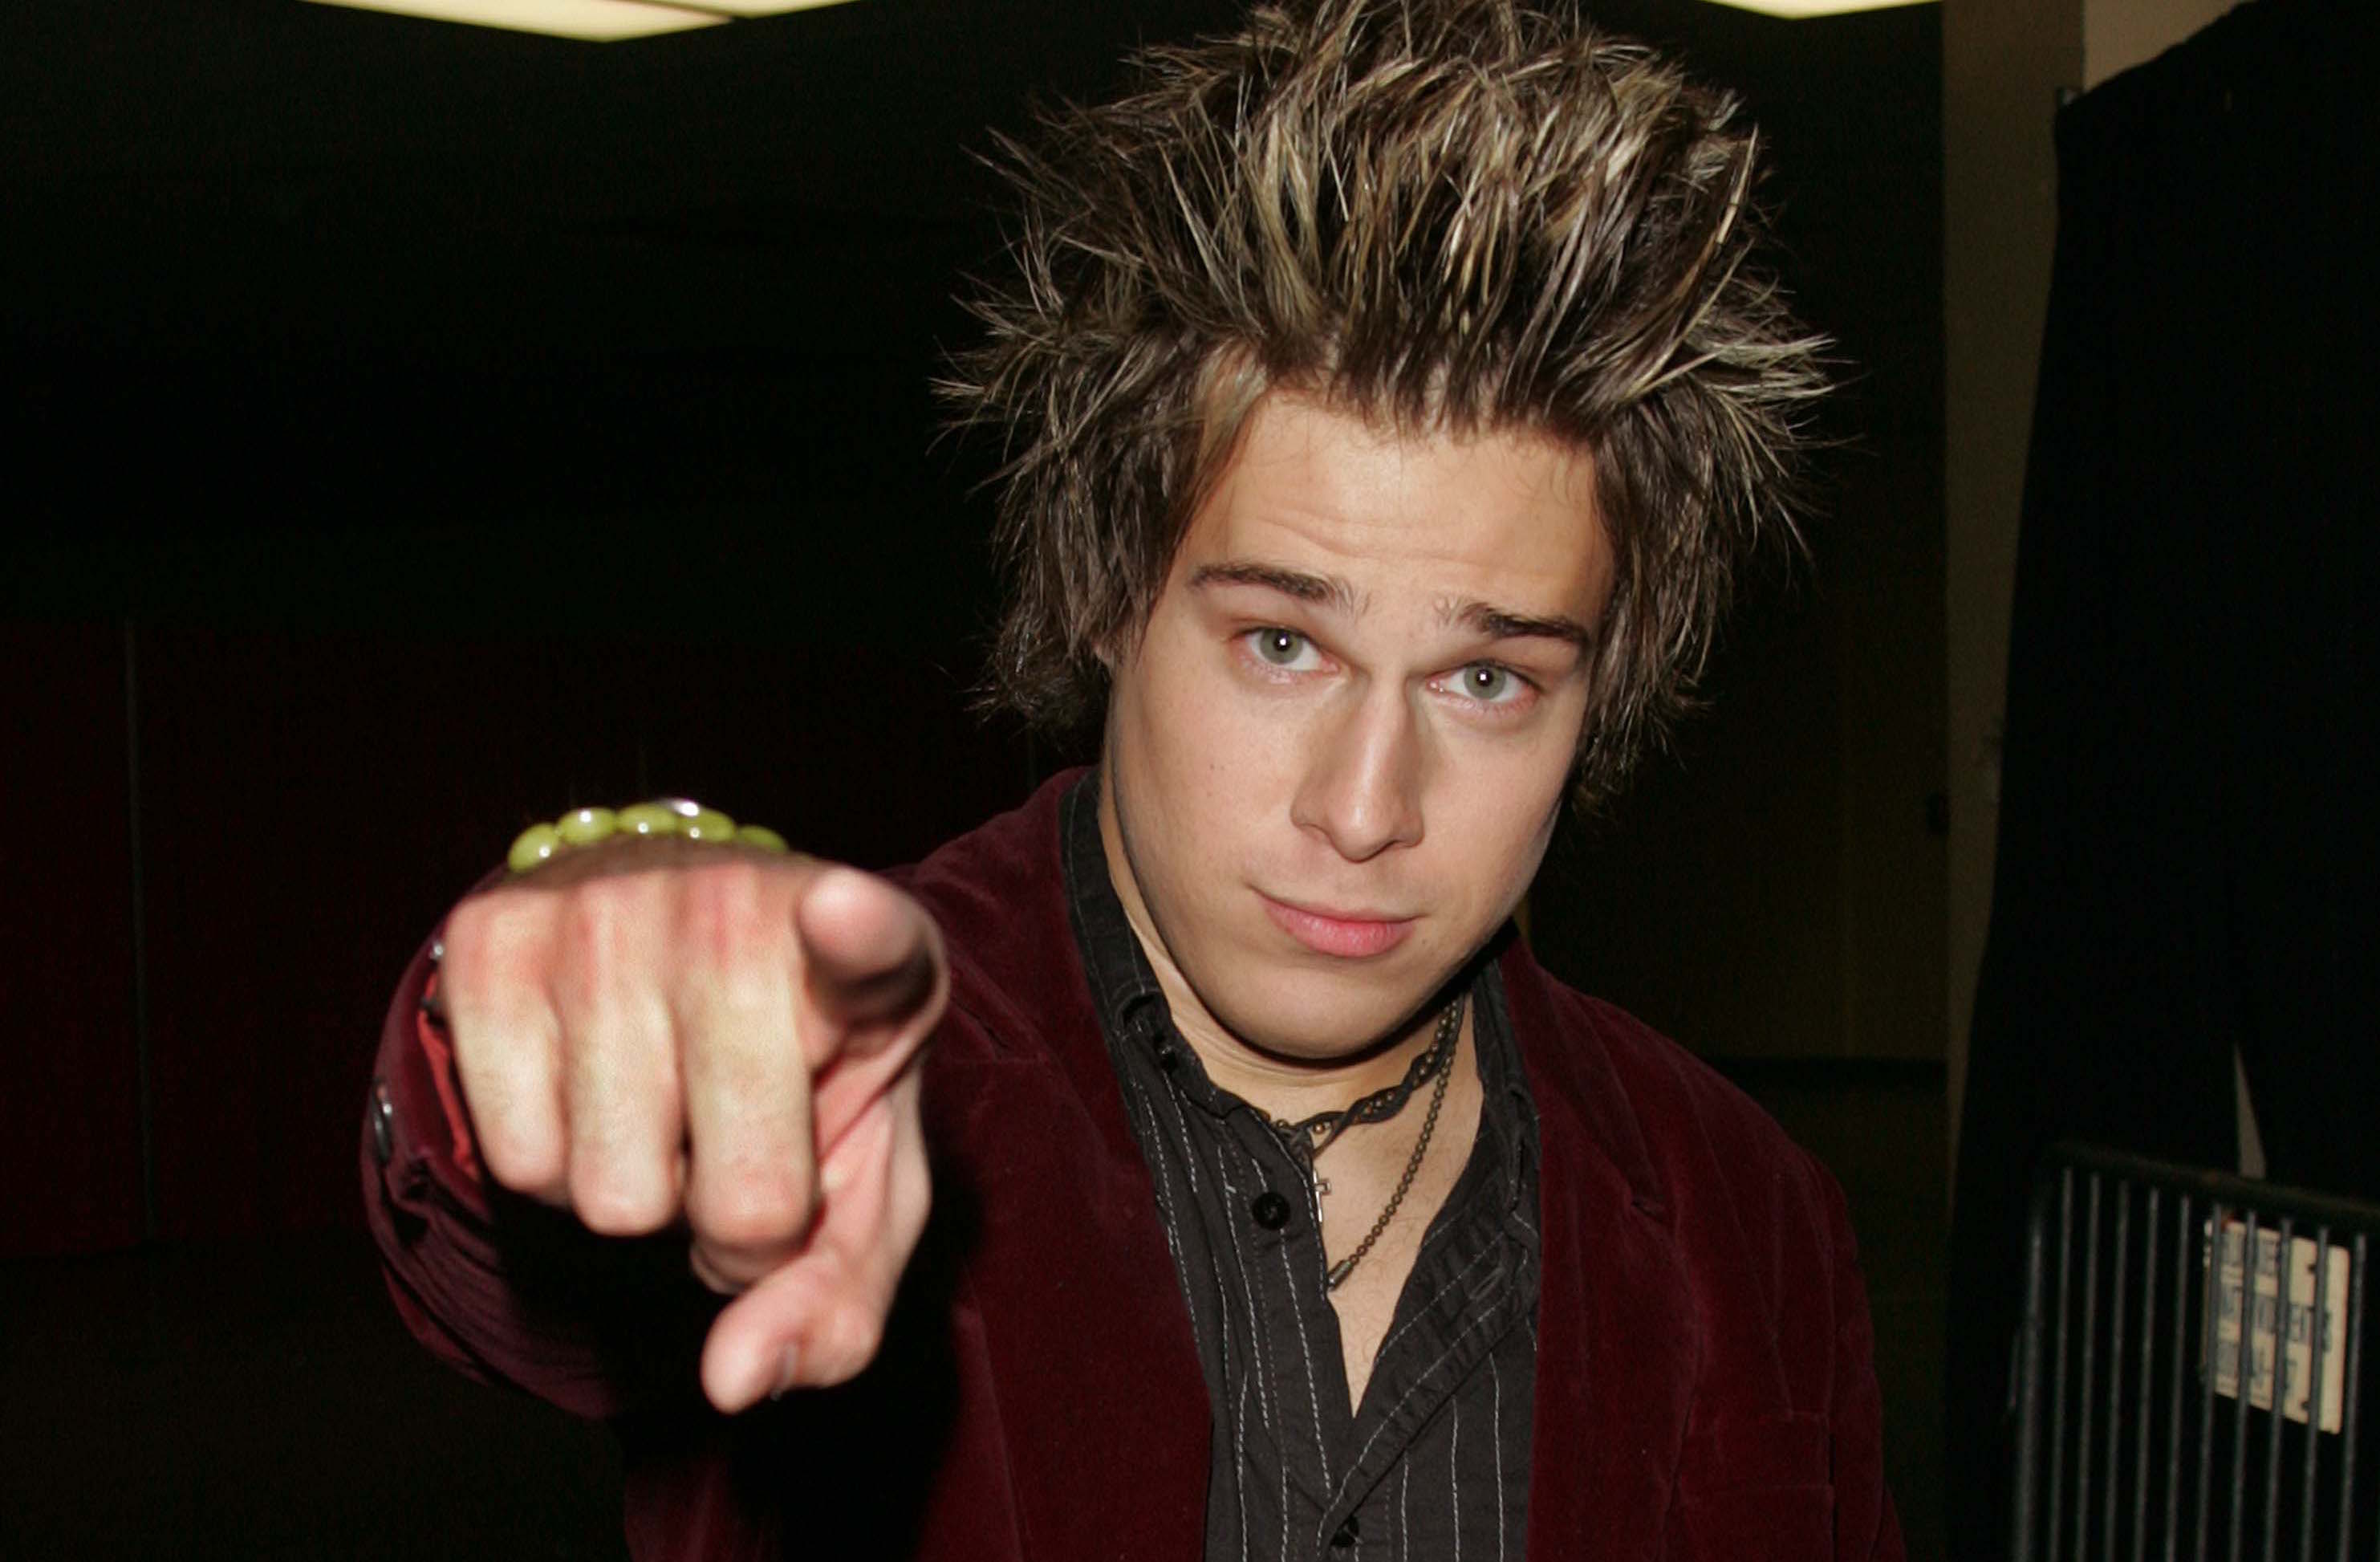 Ryan Cabrera And Ashlee Simpson: A Look At His Reality Tv Exes